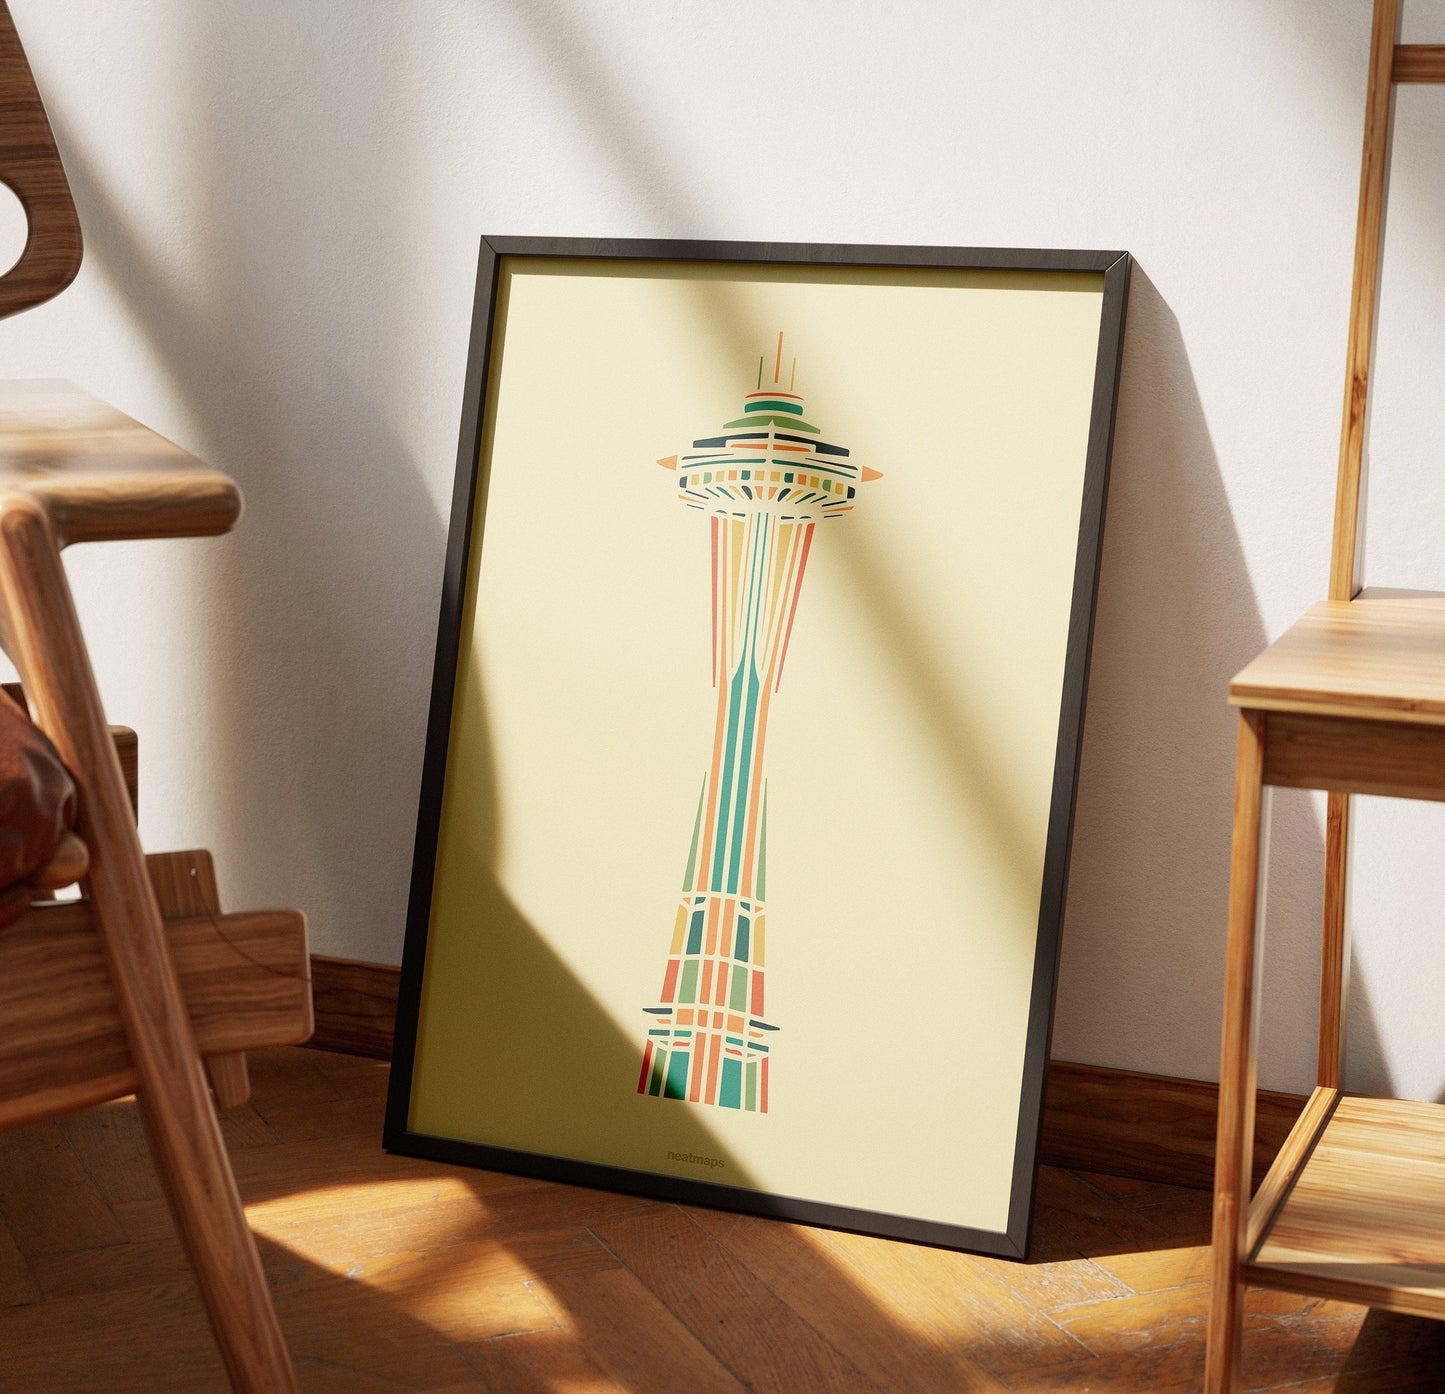 Space Needle Abstract Art Print - Seattle Landmark Illustration, Colorful Architectural Home Decor